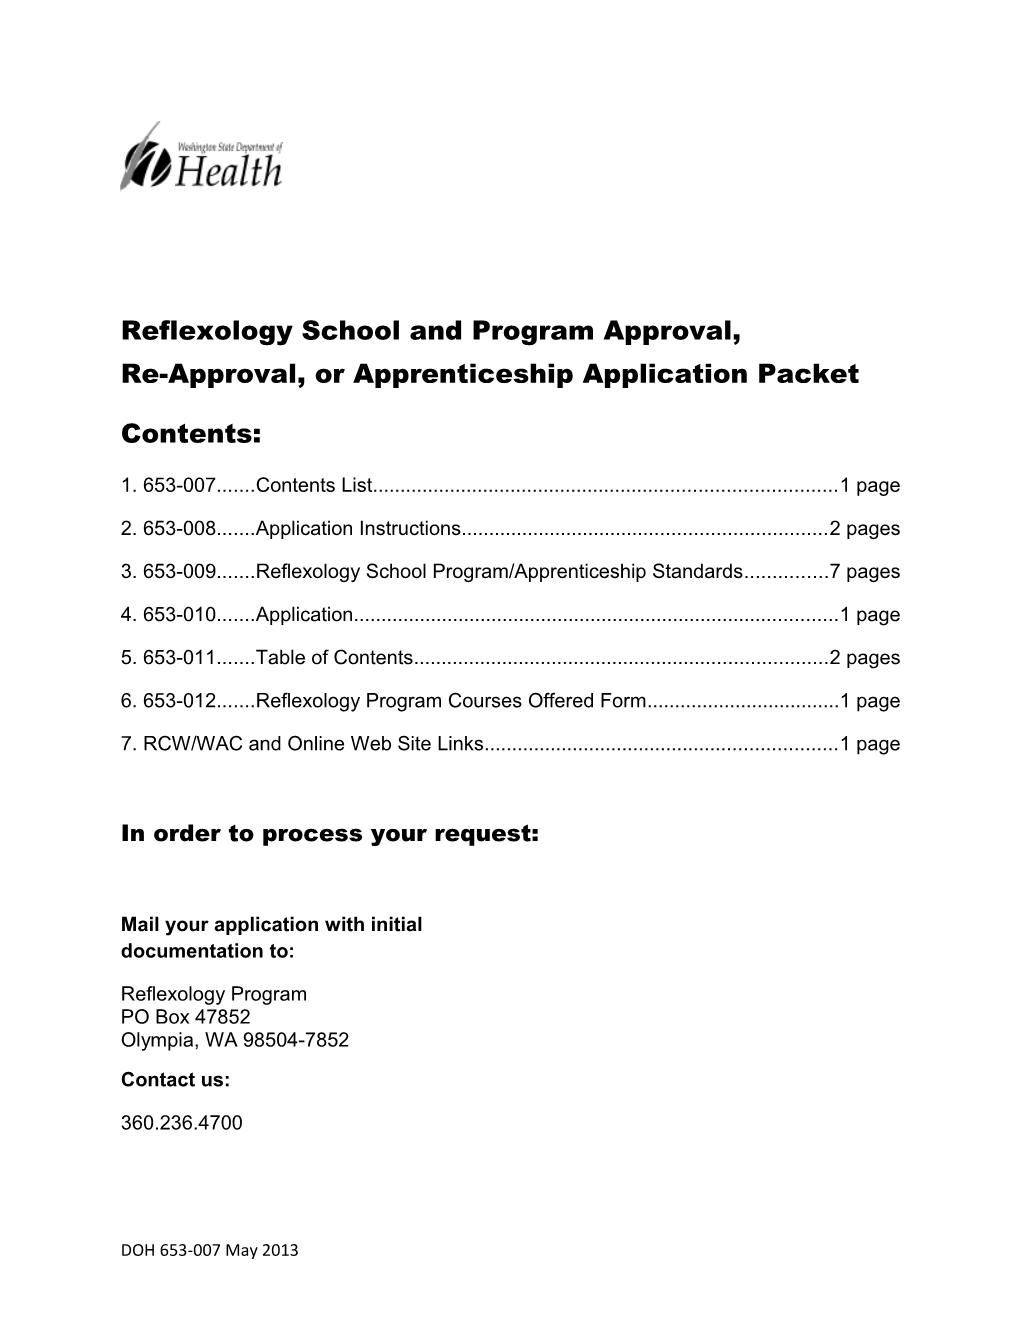 Massage School Program Approval, Re-Approval, Or Apprenticeship Application Packet